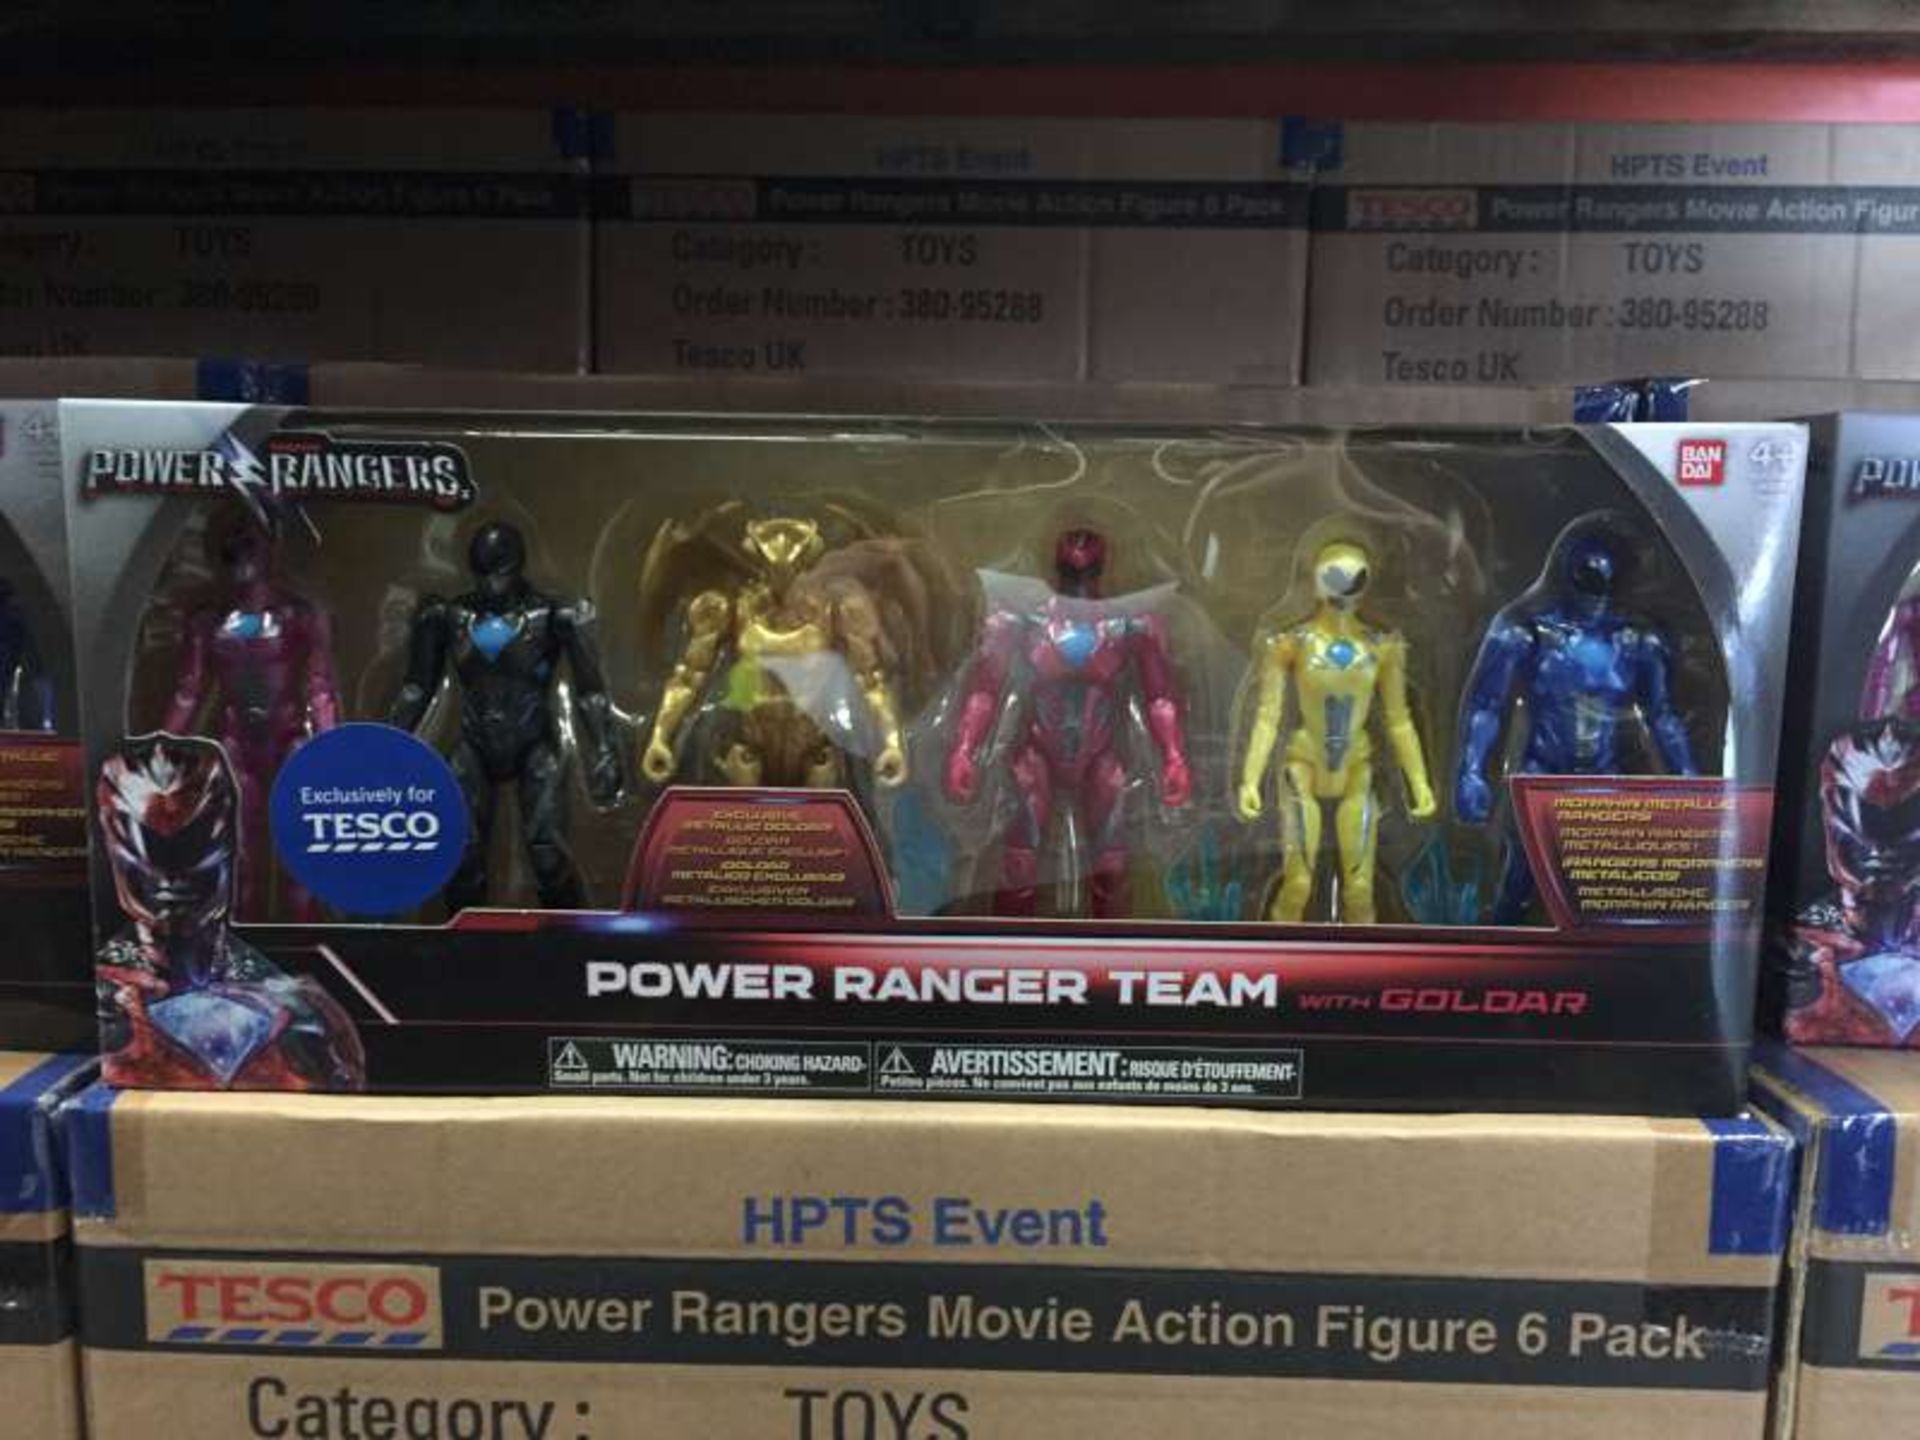 8 X BRAND NEW BOXED POWER RANGERS MOVIE ACTION FIGURE 6 PACK WITH GOLDAR IN 4 BOXES